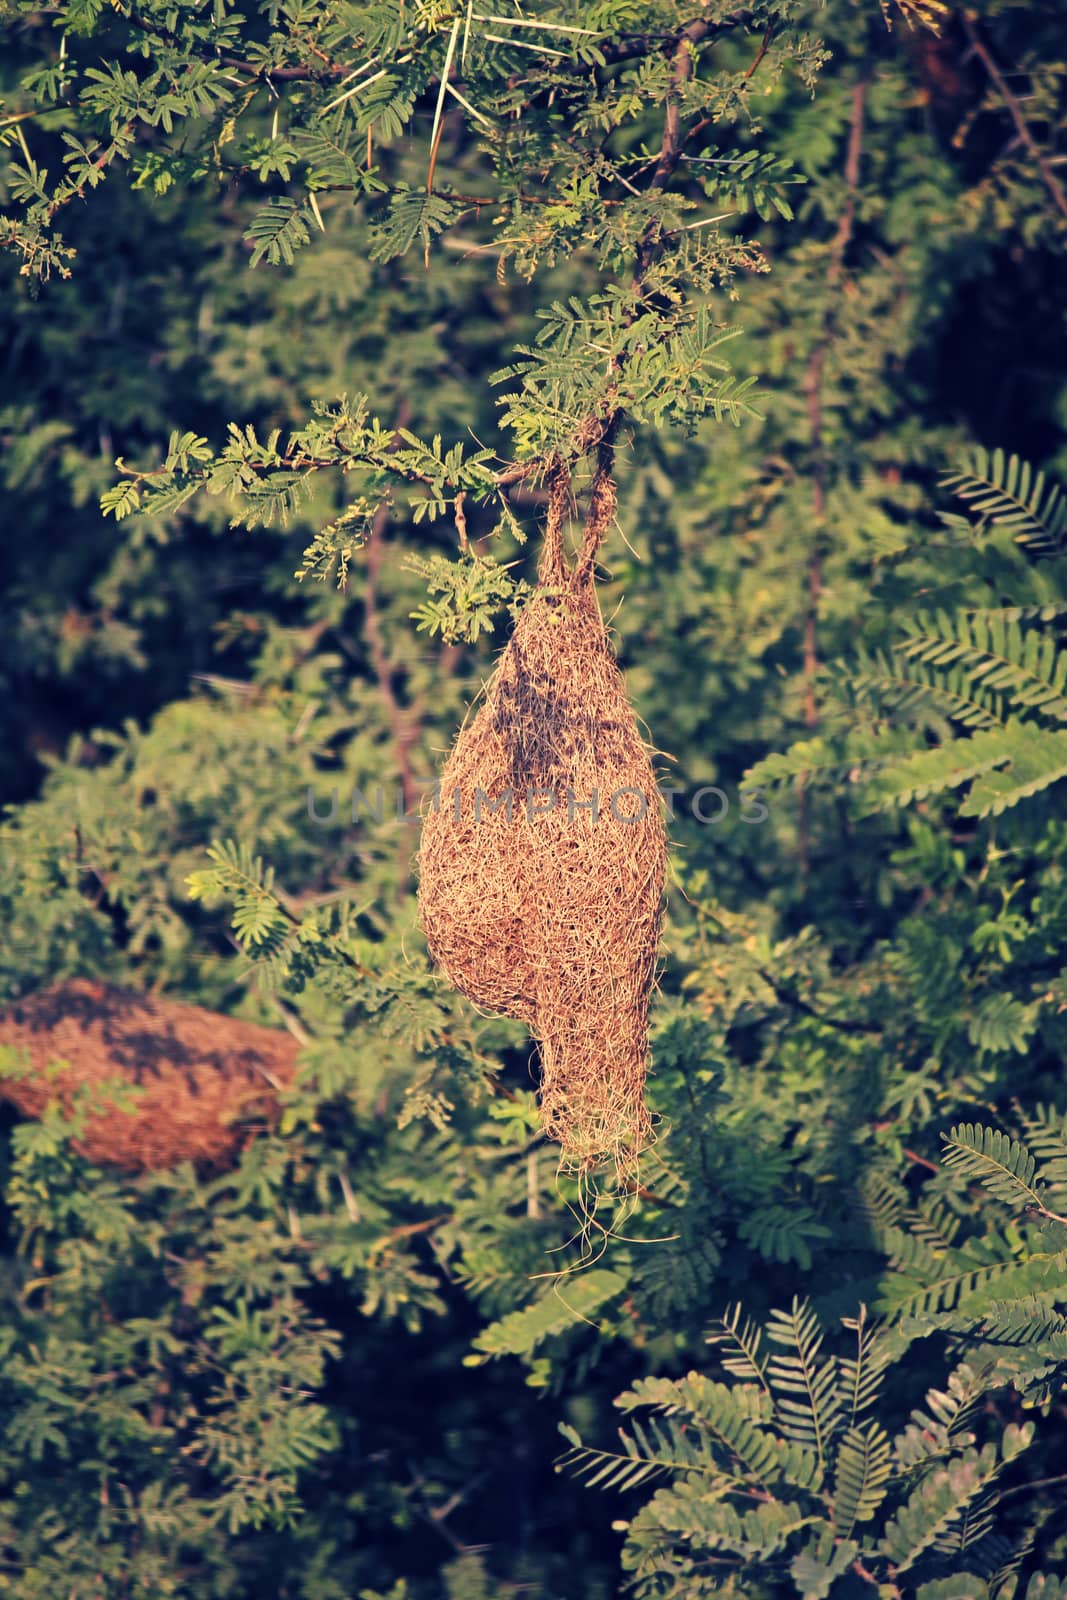 Nests of weaver birds. by yands